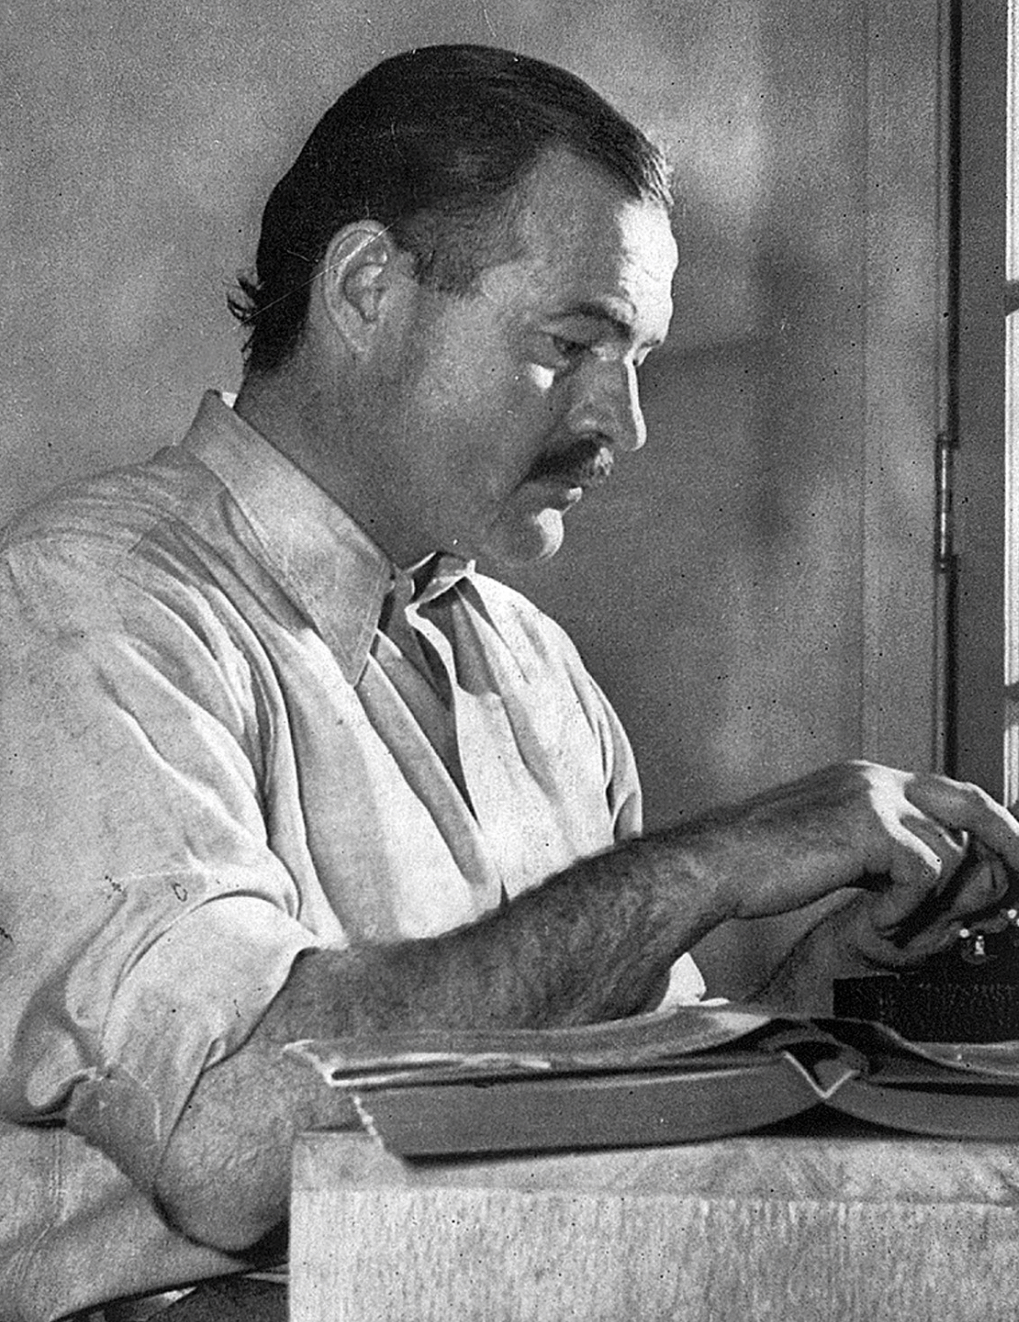 Ernest Hemingway’s Literary Legacy: Book Count and Impact